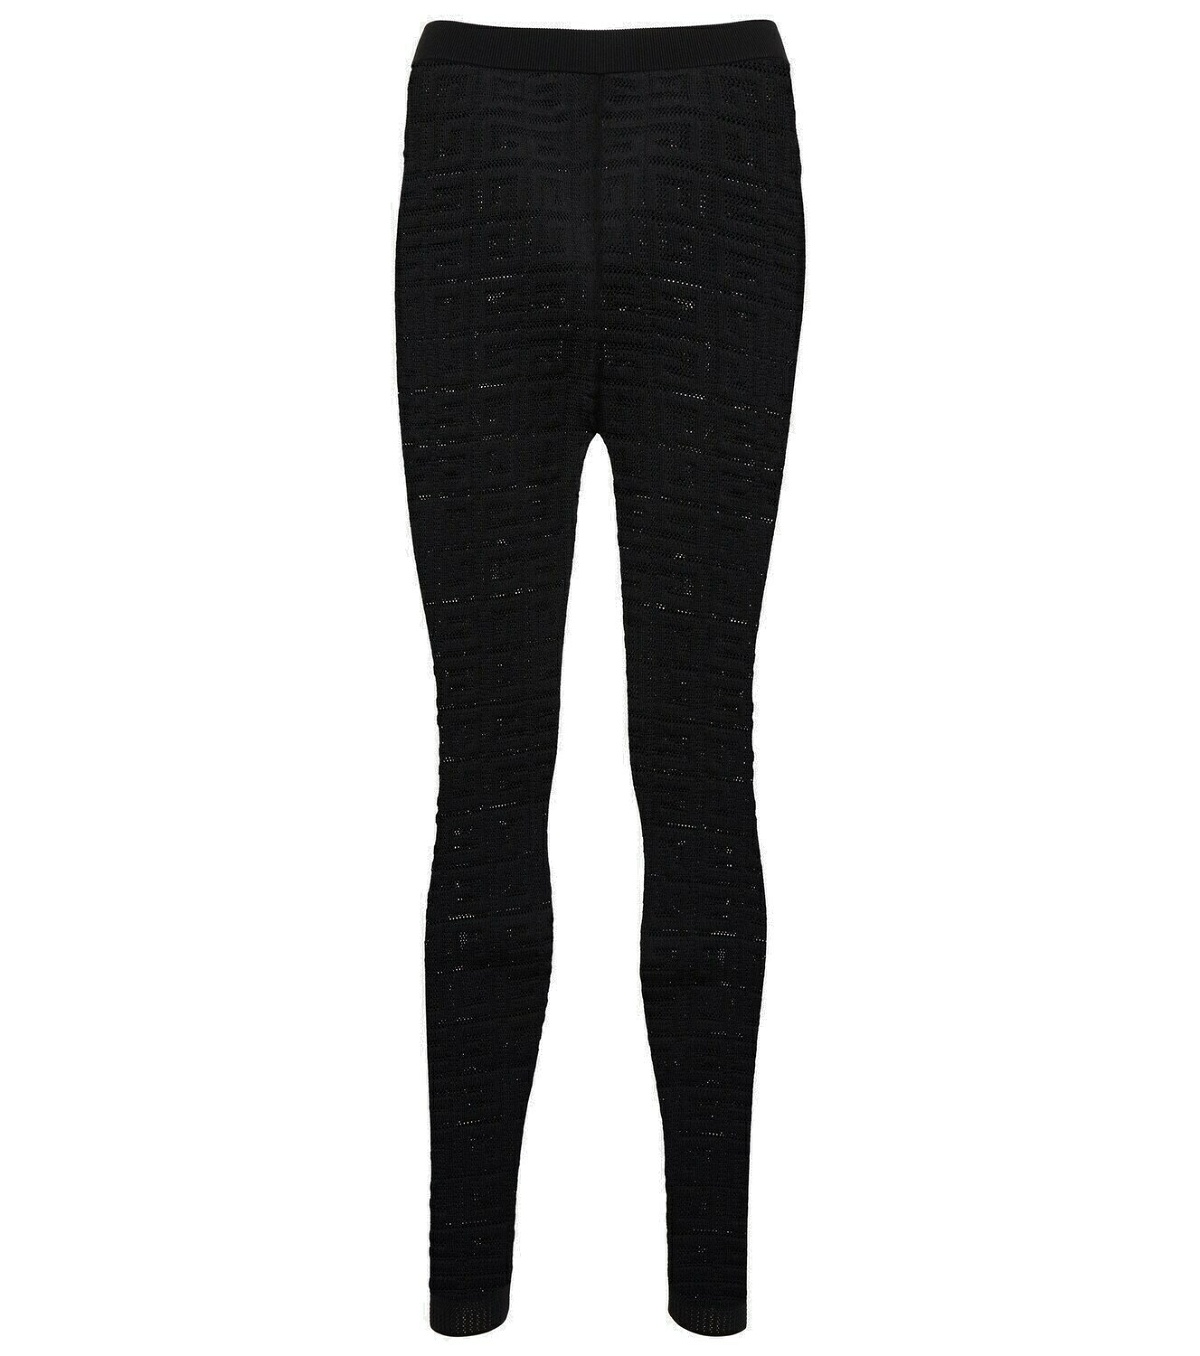 Buy Givenchy Purple 4g Leggings - 541 At 23% Off